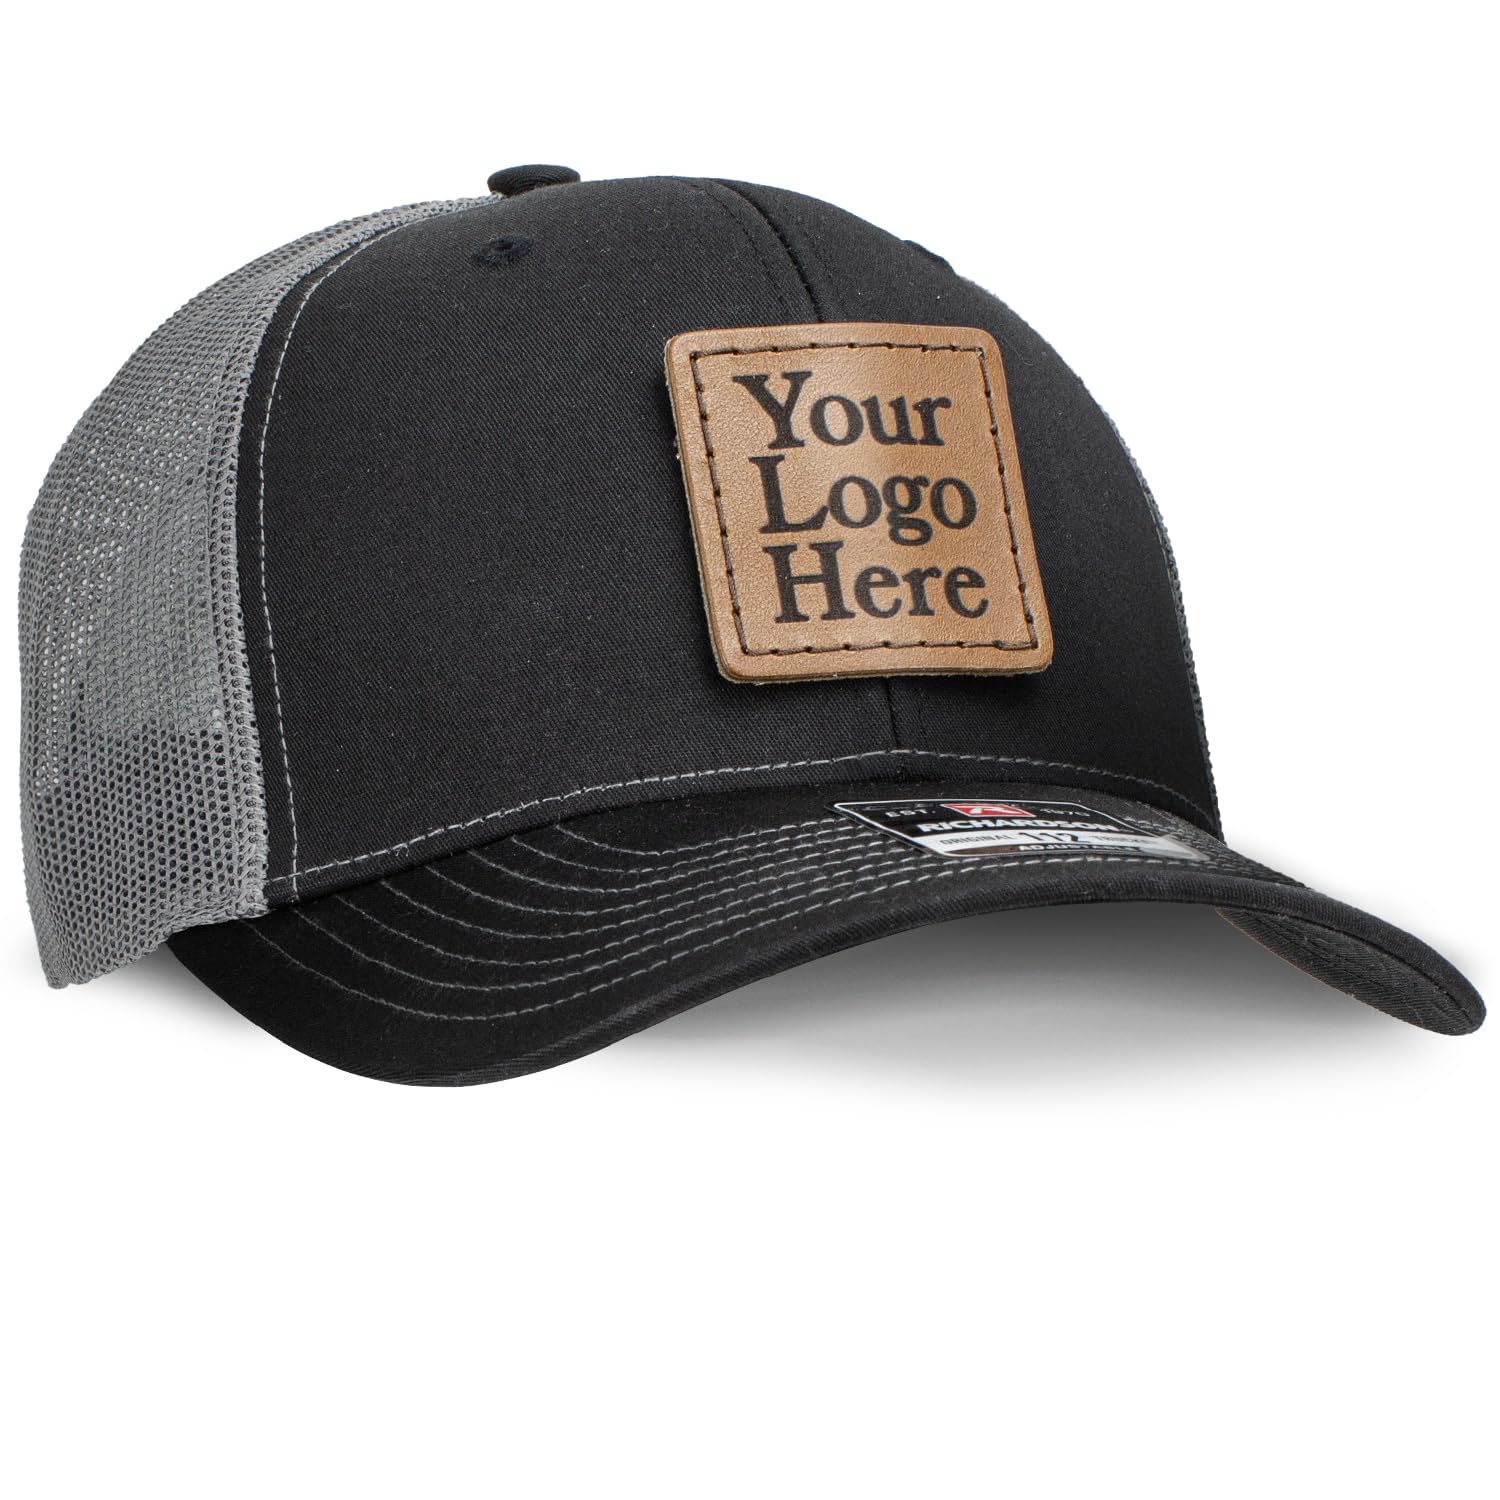 Black and Charcoal Trucker Hat